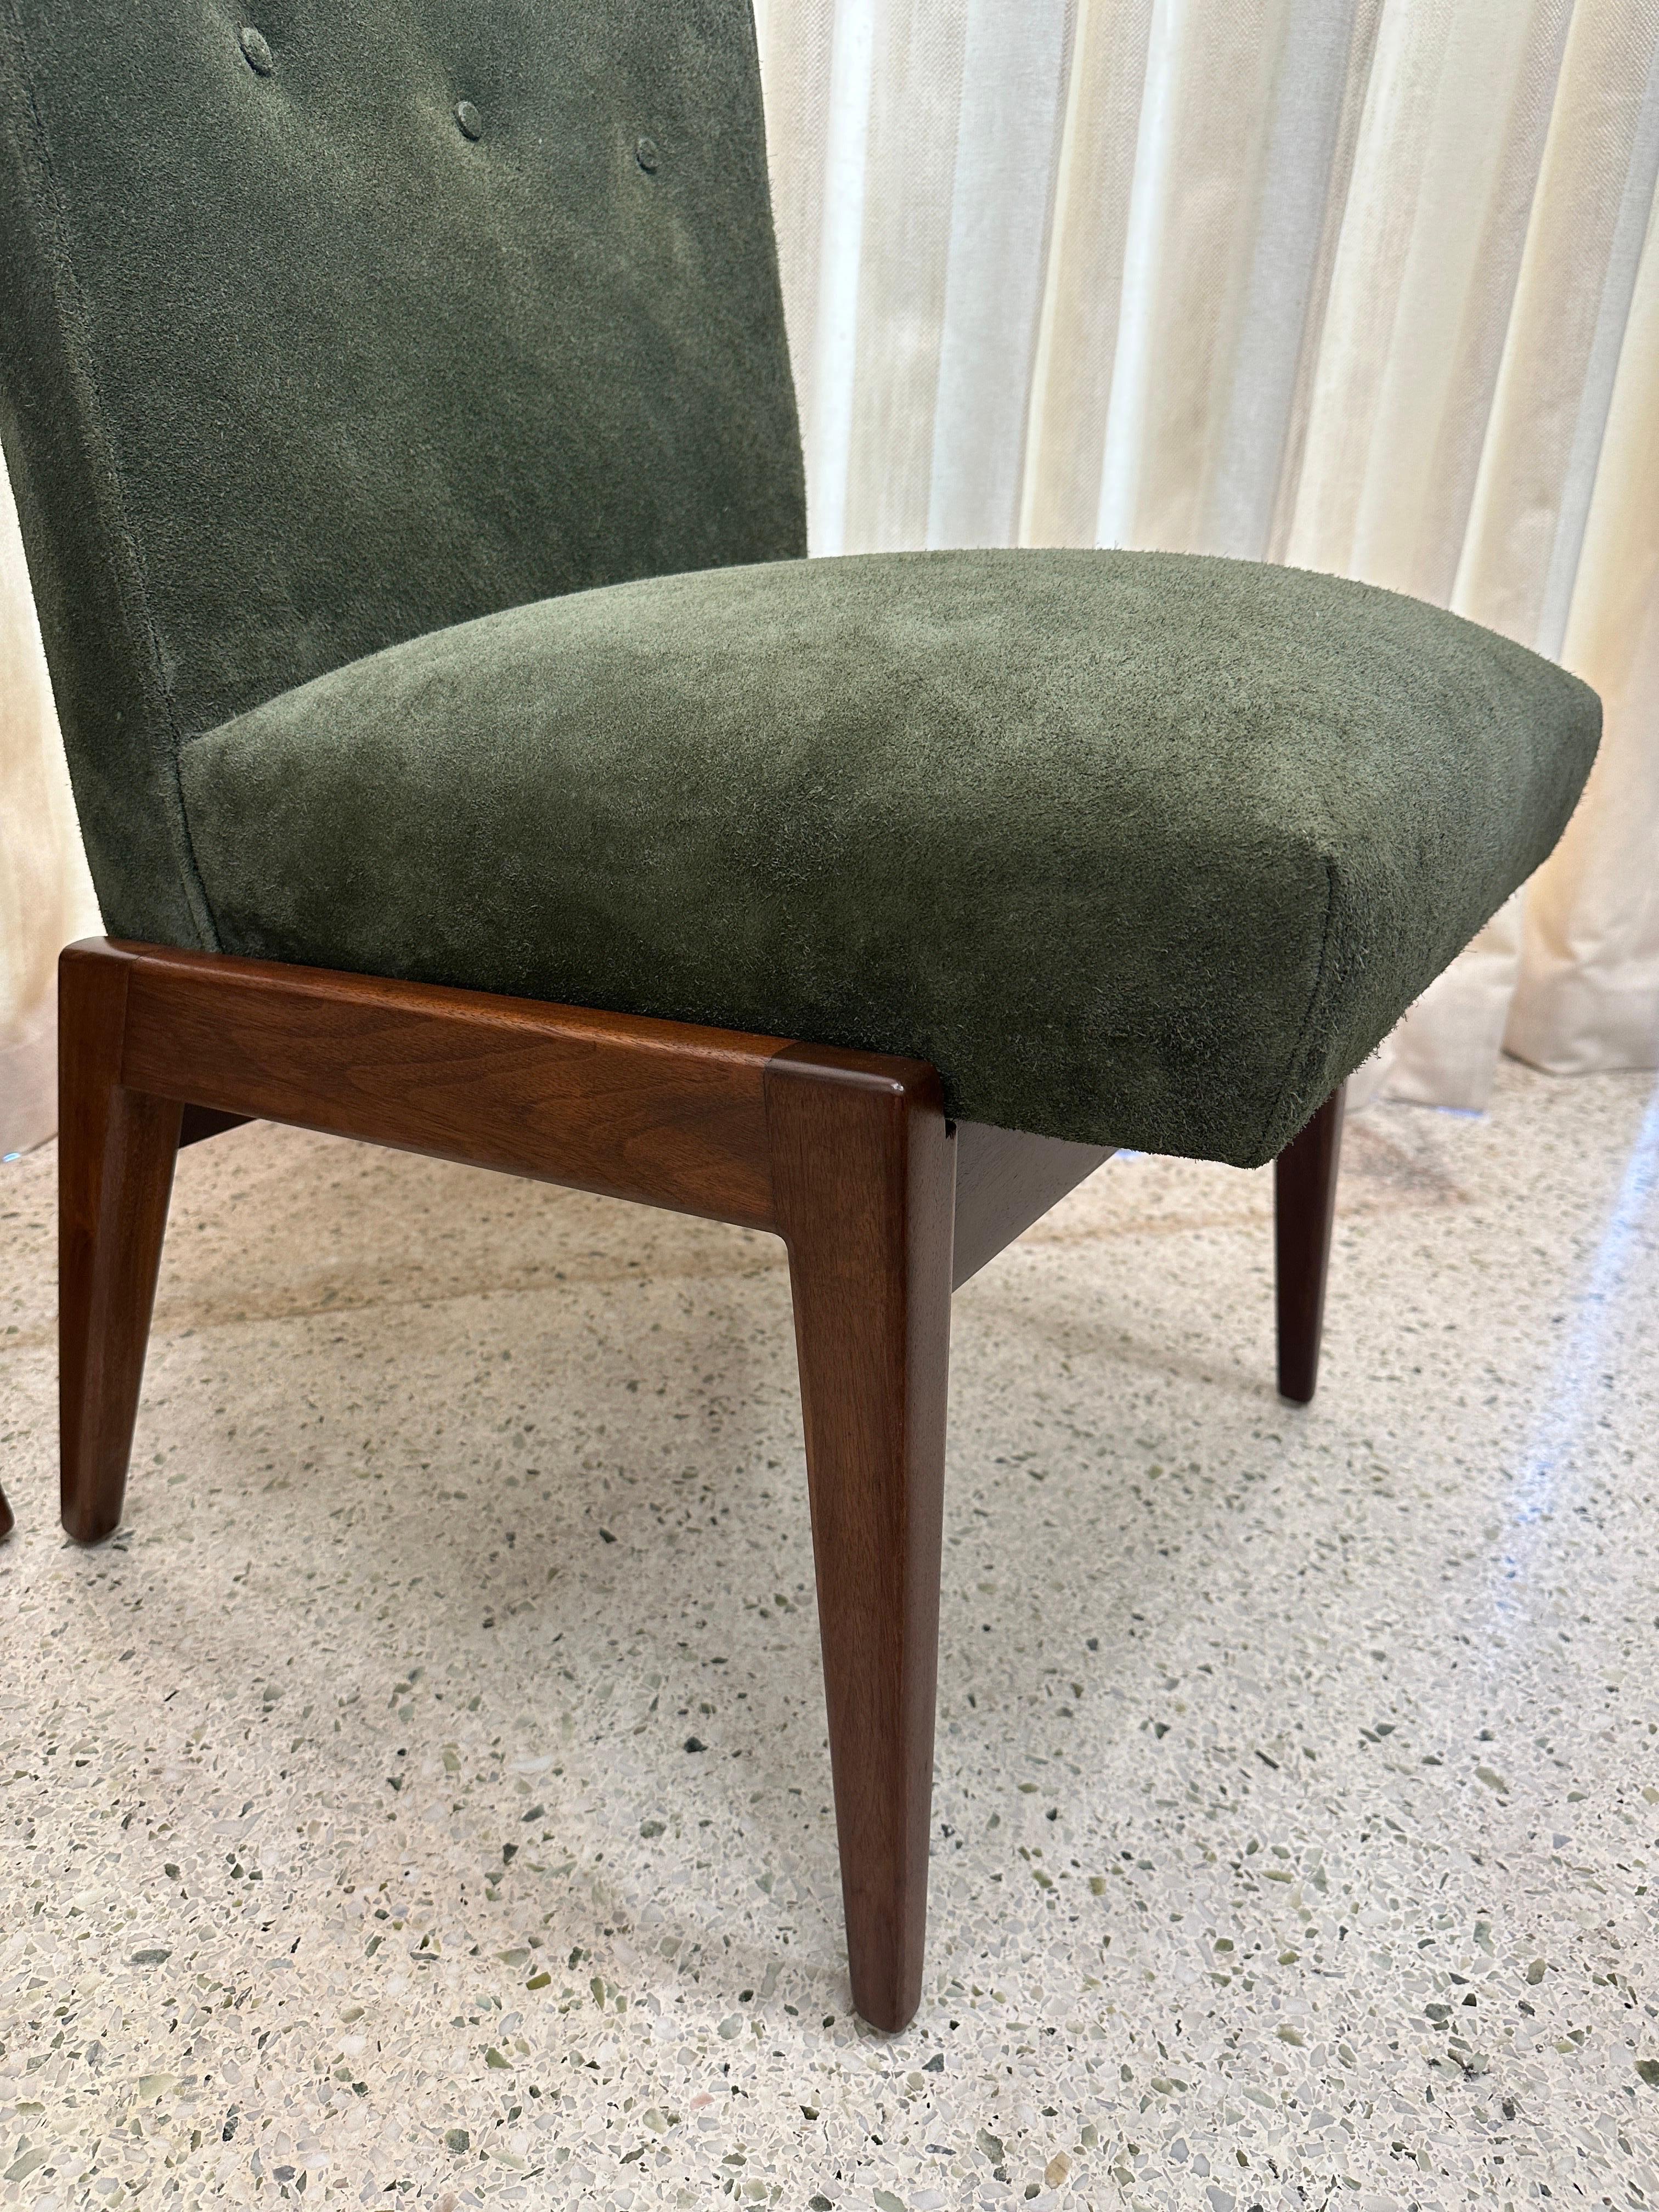 Wonderful authentic labelled vintage Jens Risom chairs in Walnut frame and upholstered in a sumptuous Rolex green suede.  The walnut frame has been lovingly refinished to its original luster.  THIS ITEM IS LOCATED AND WILL SHIP FROM OUR MIAMI,